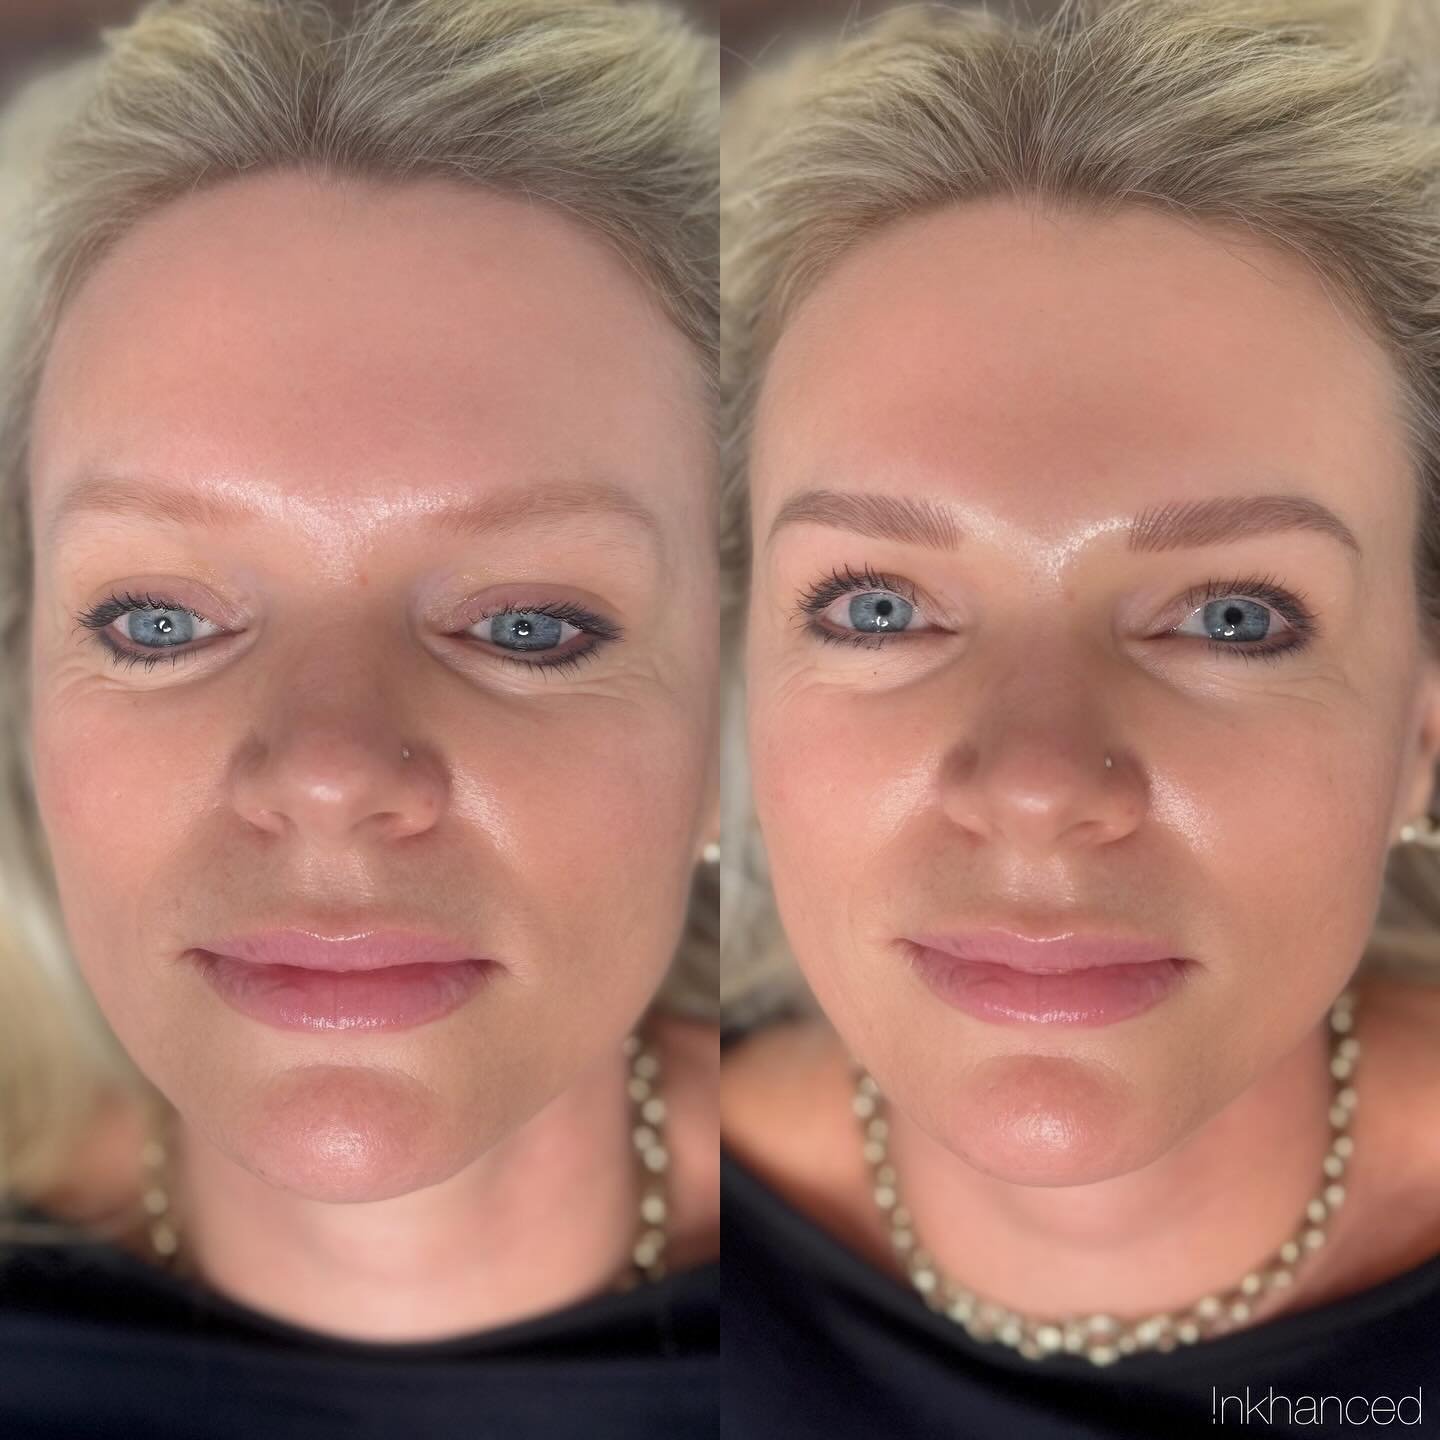 🪶 Feathery Eyebrow Enhancement

🪶During the consultation we discuss the technique options and what is best suited to each client, factoring in their skin type, age, hair colour and style wishes.

🪶If clients already have an existing eyebrow tattoo